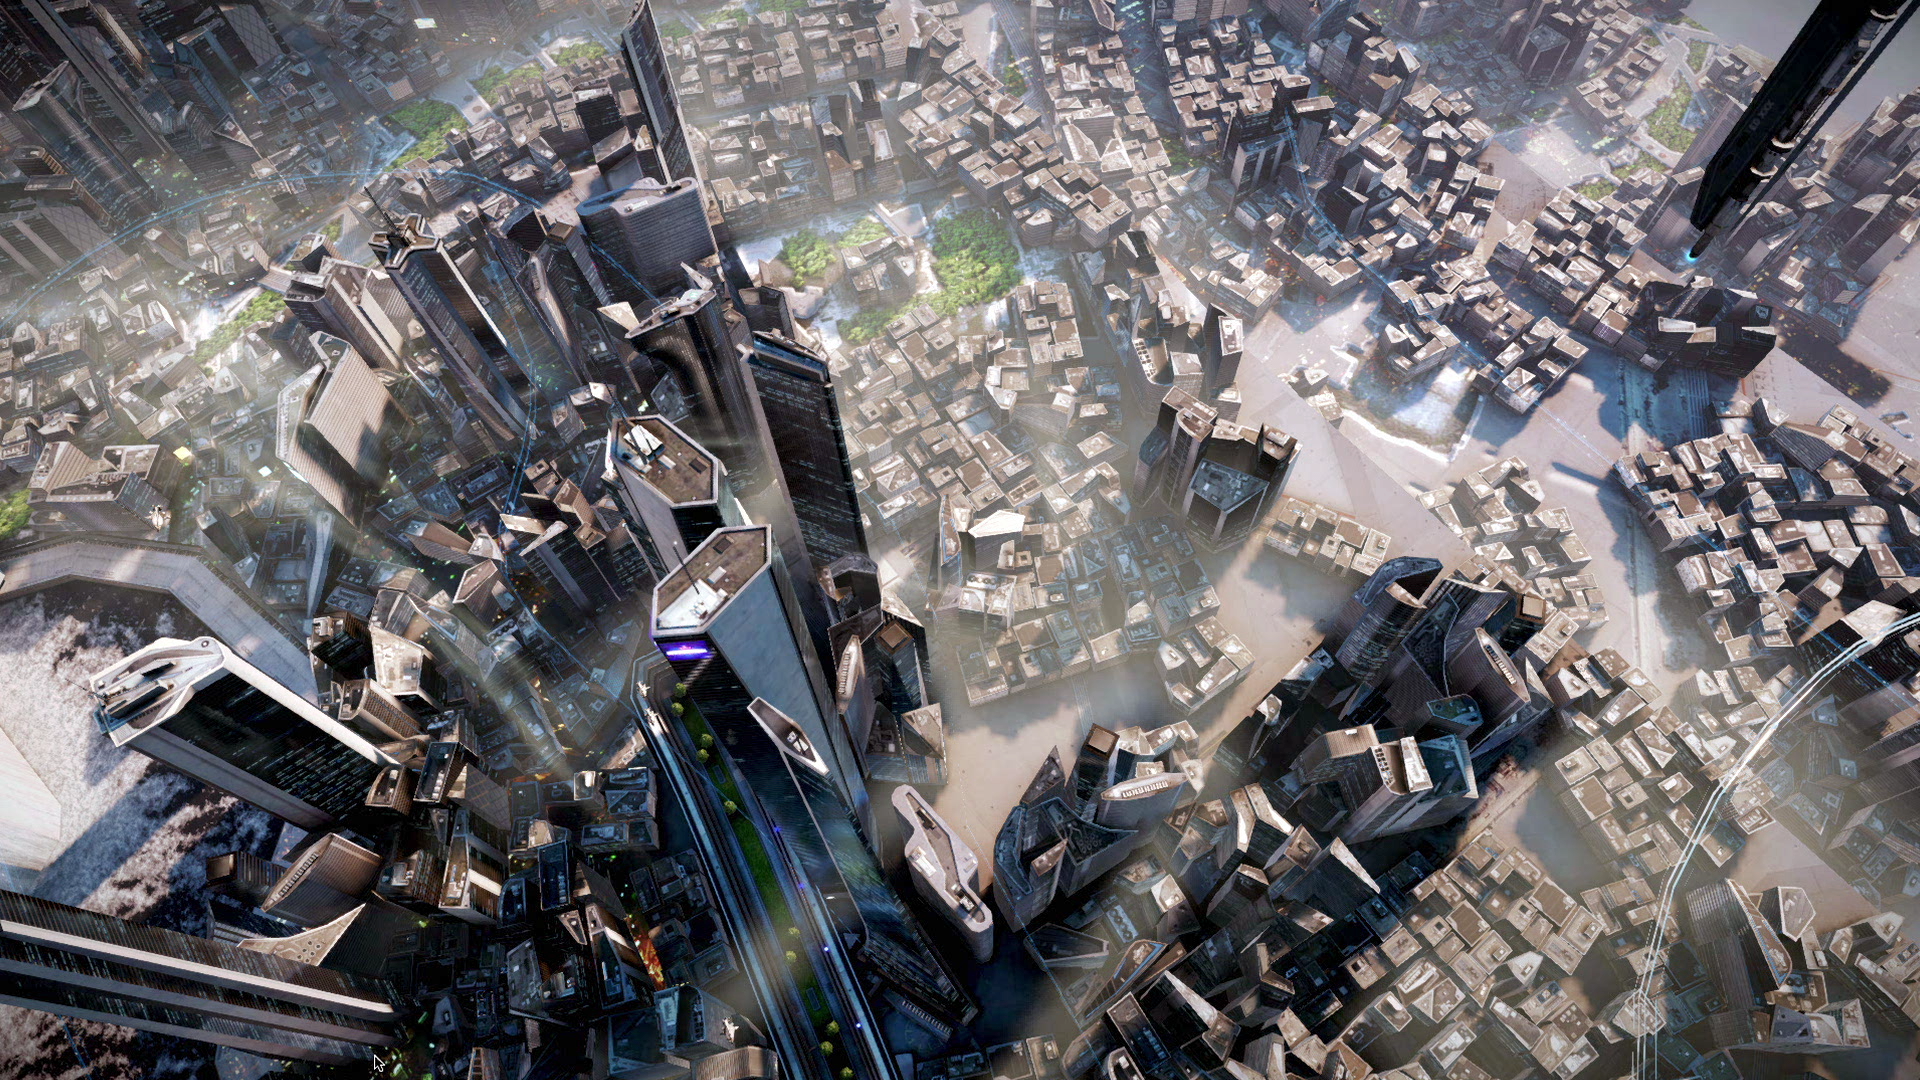 Killzone: Shadow Fall's opening fly-by shot makes for incredible viewing, with a seemingly limitless draw distance. The city sprawl effect is achieved in ...